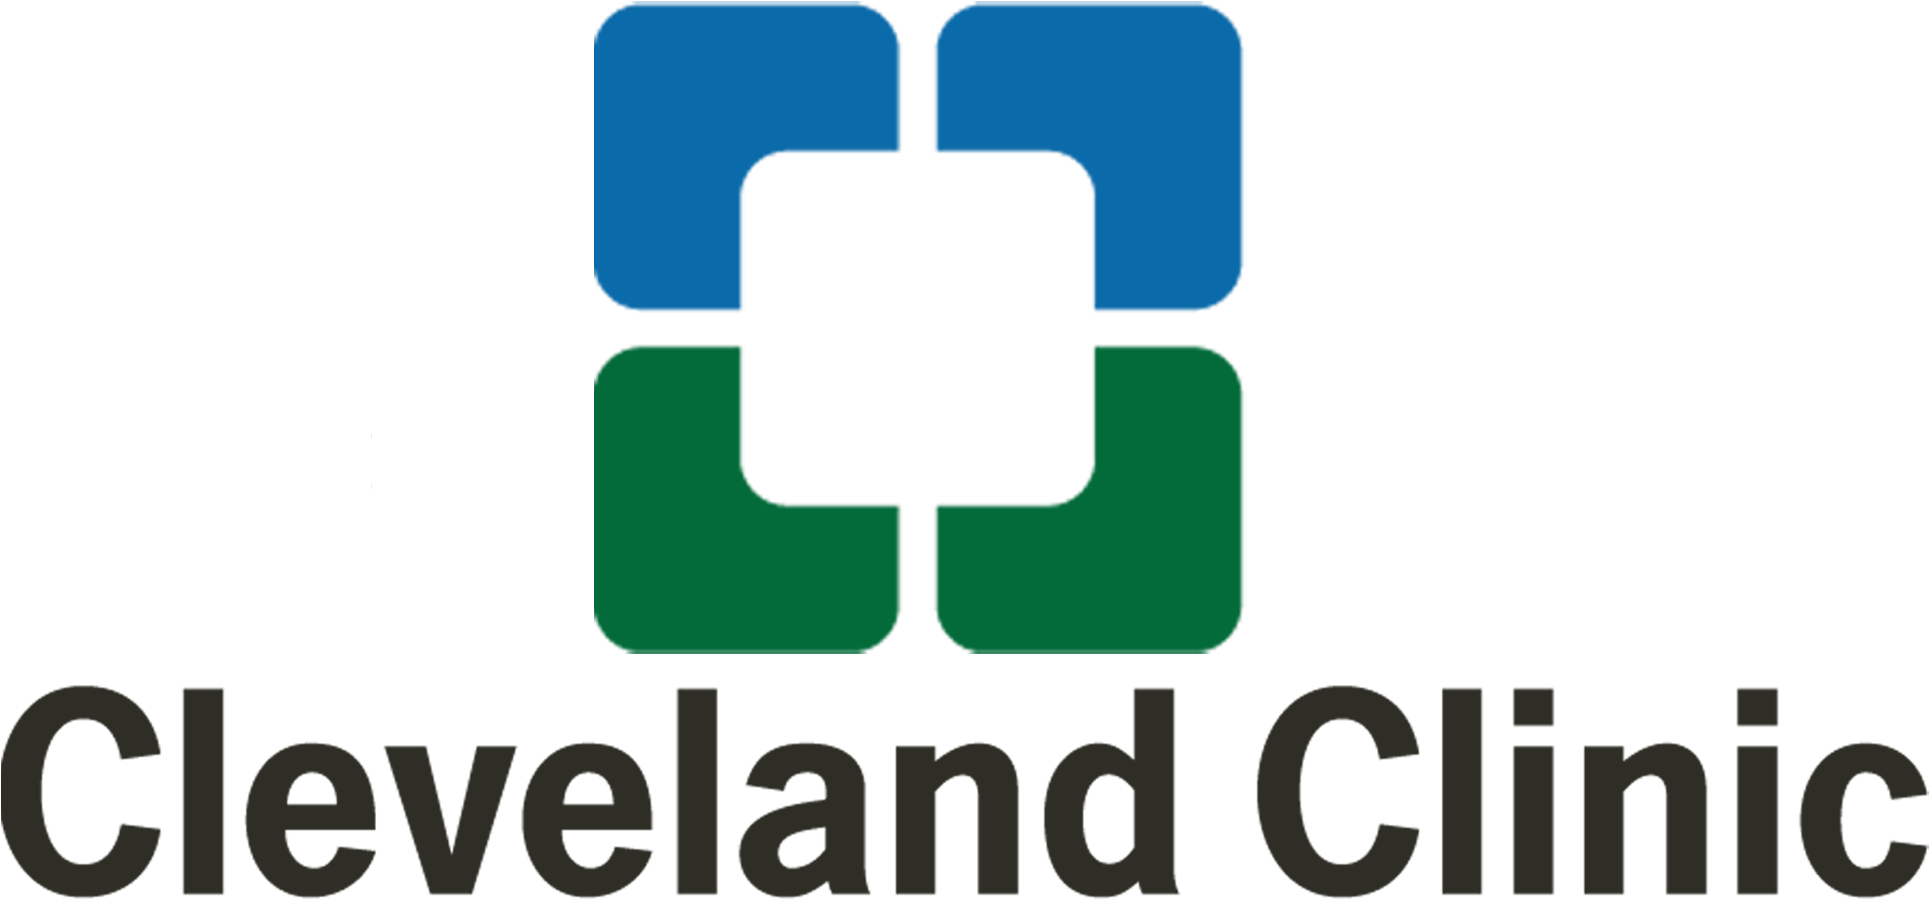 716-7169858_cleveland-clinic-logo-png.png